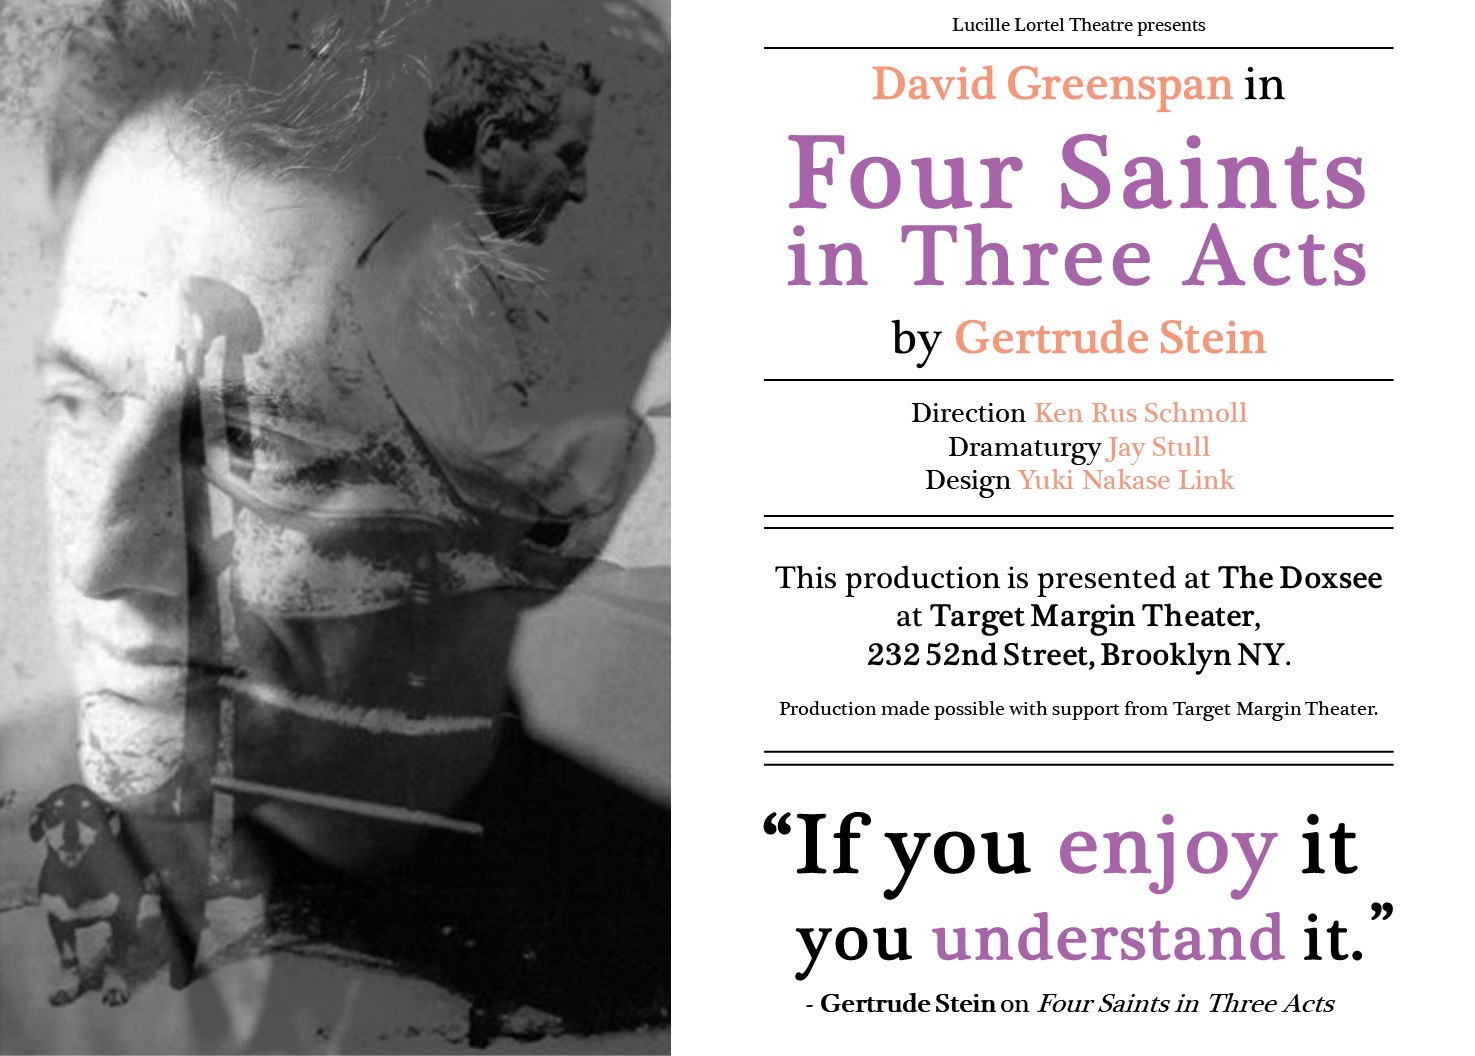 Poster image for play: Four Saints in Three Acts. A photo of David Greenspan is superimposed over a black and white photo of Gertrude Stein on the left. The poster reads: Lortel Theatre presents David Greenspan in Four Saints in Three Acts by Gertrude Stein. Direction: Ken Rus Schmoll, Dramaturgy: Jay Stull, Design: Yuki Nakase Link. This production is presented at The Doxsee at Target Margin Theater. 232 52nd Street, Brooklyn, NY. Production made possible with support from Target Margin Theater. For tickets visit lortel.org. At the bottom right corner of the poster, it reads: If you enjoy it, you understand it, a quote by Gertrude Stein.